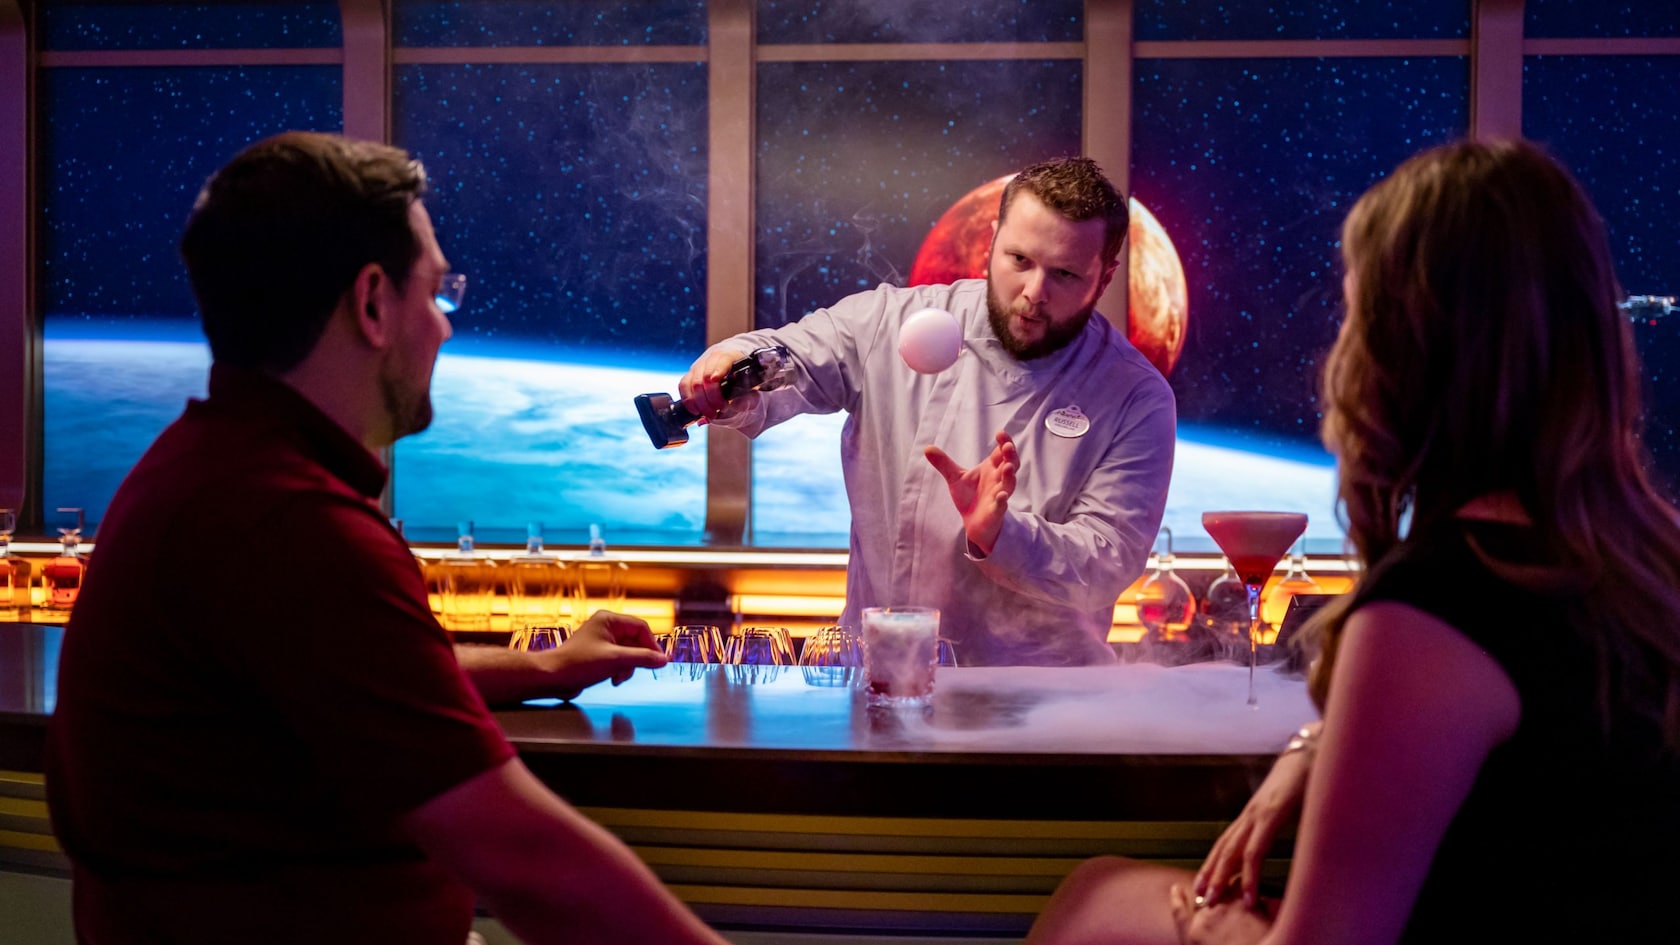 A bartender performing a bar trick with a small floating orb for 2 guests in the Star Wars Hyperspace Lounge